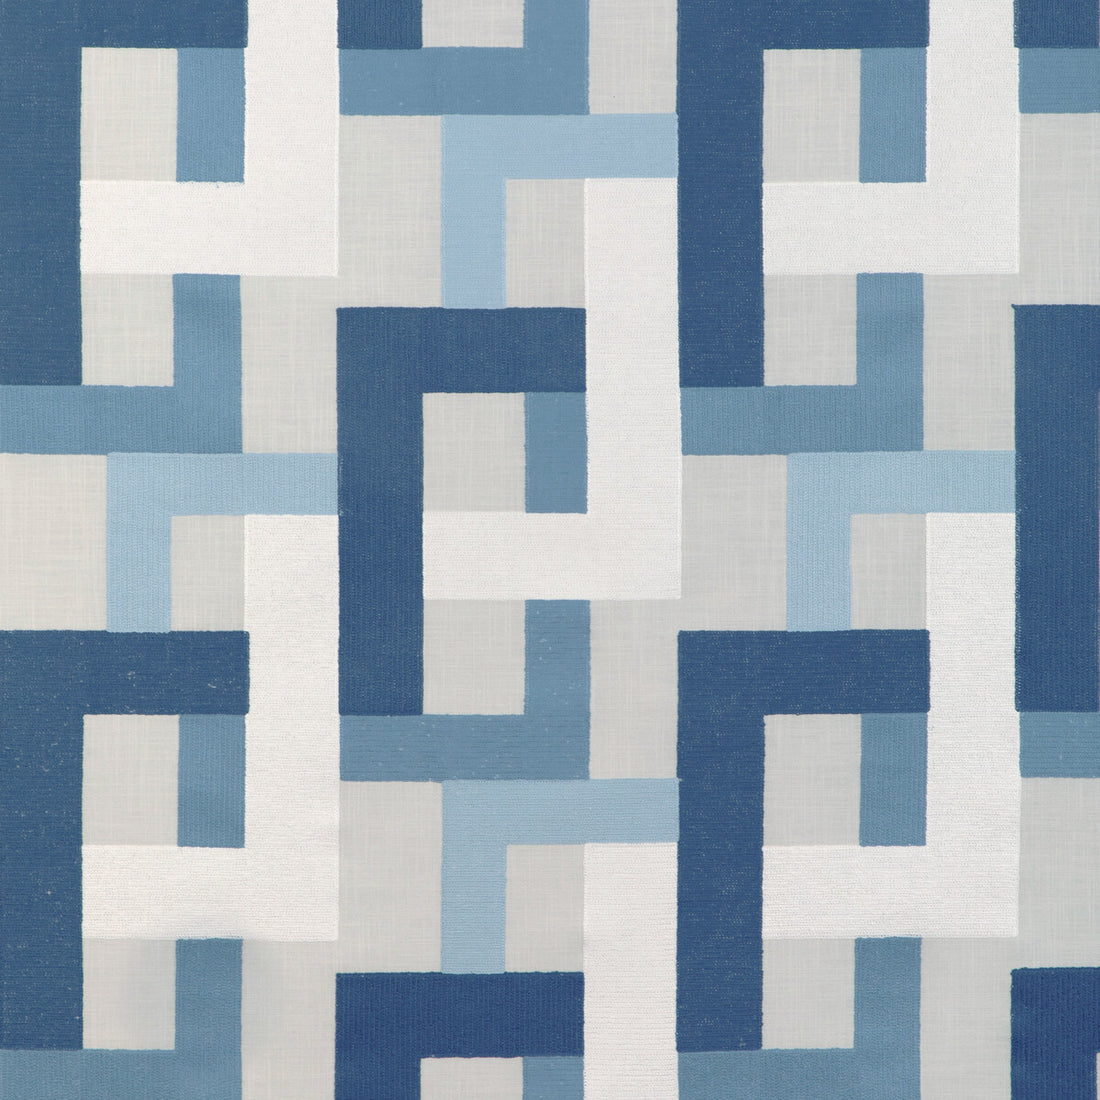 Farnsworth fabric in ocean color - pattern 90009.51.0 - by Kravet Basics in the Mid-Century Modern collection